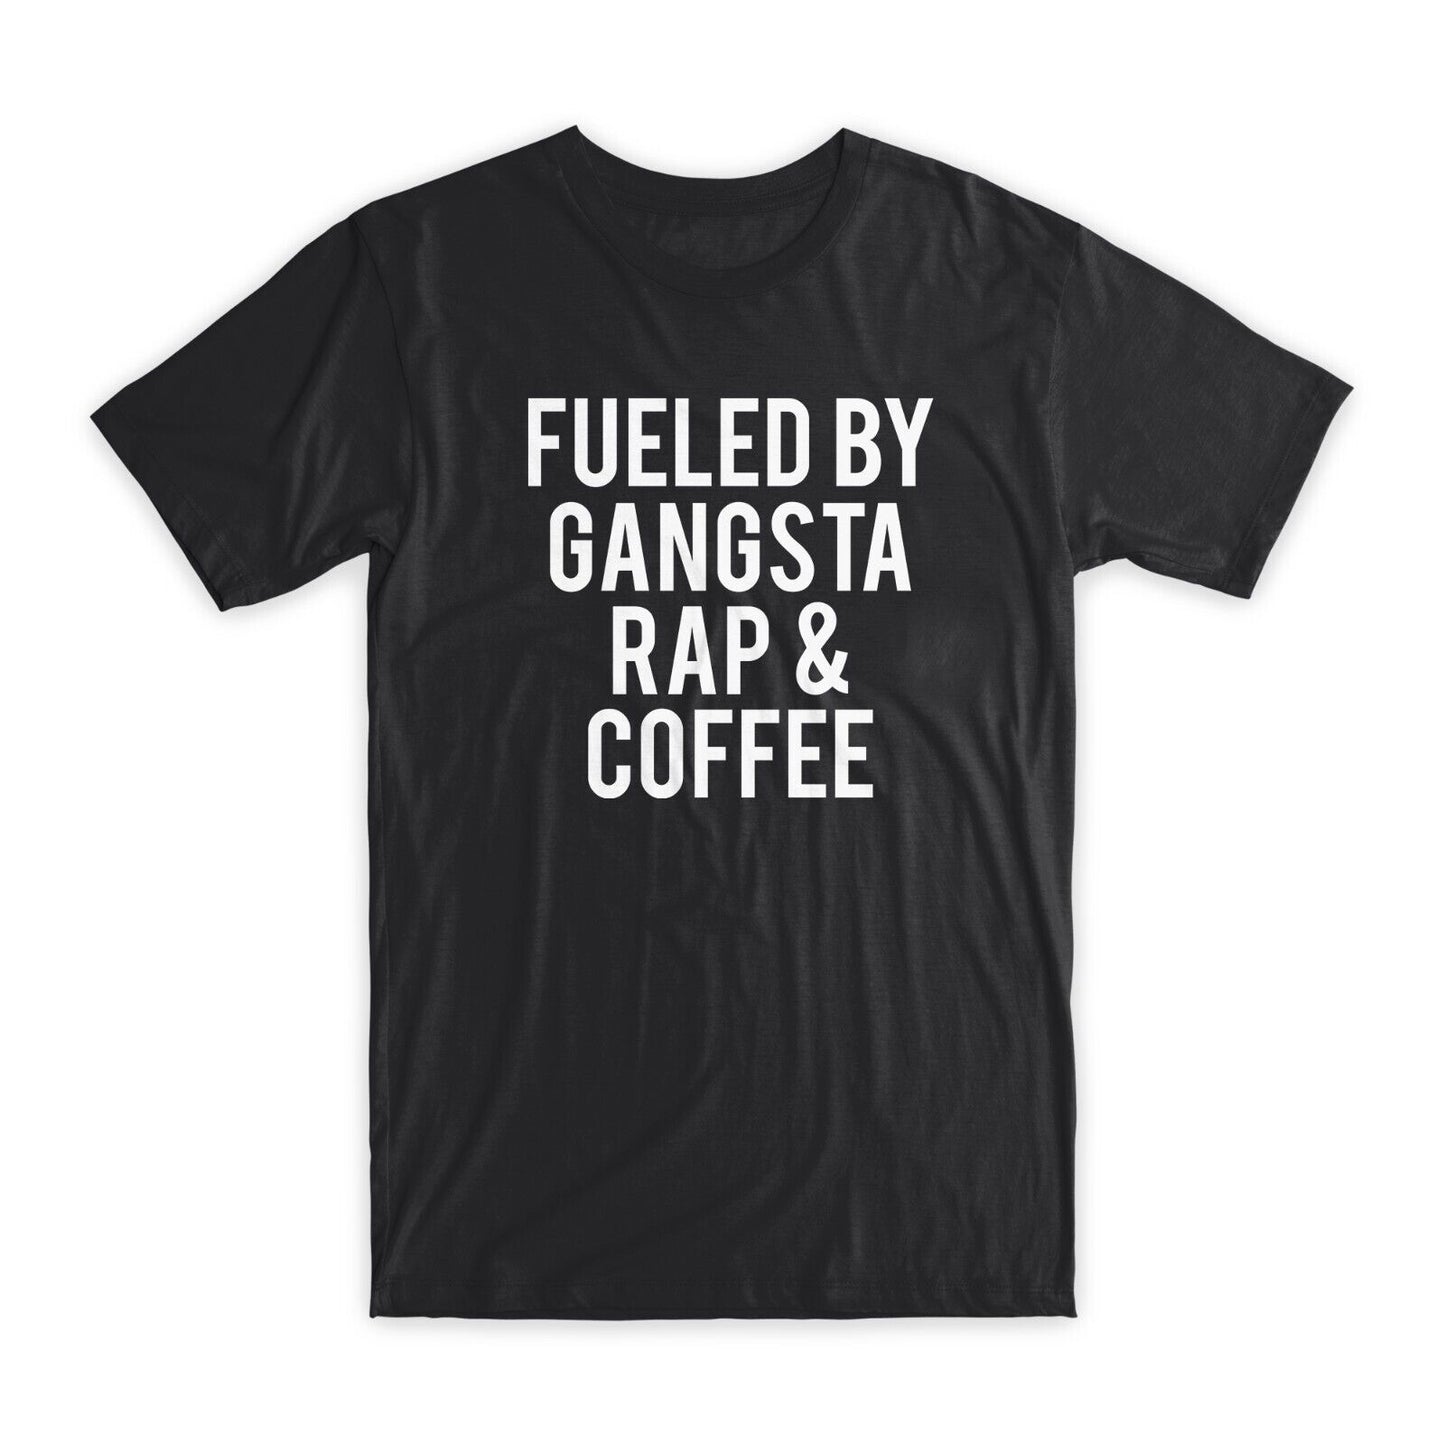 Fueled By Gangsta Rap & Coffee T-Shirt Premium Soft Cotton Funny Tees Gifts NEW